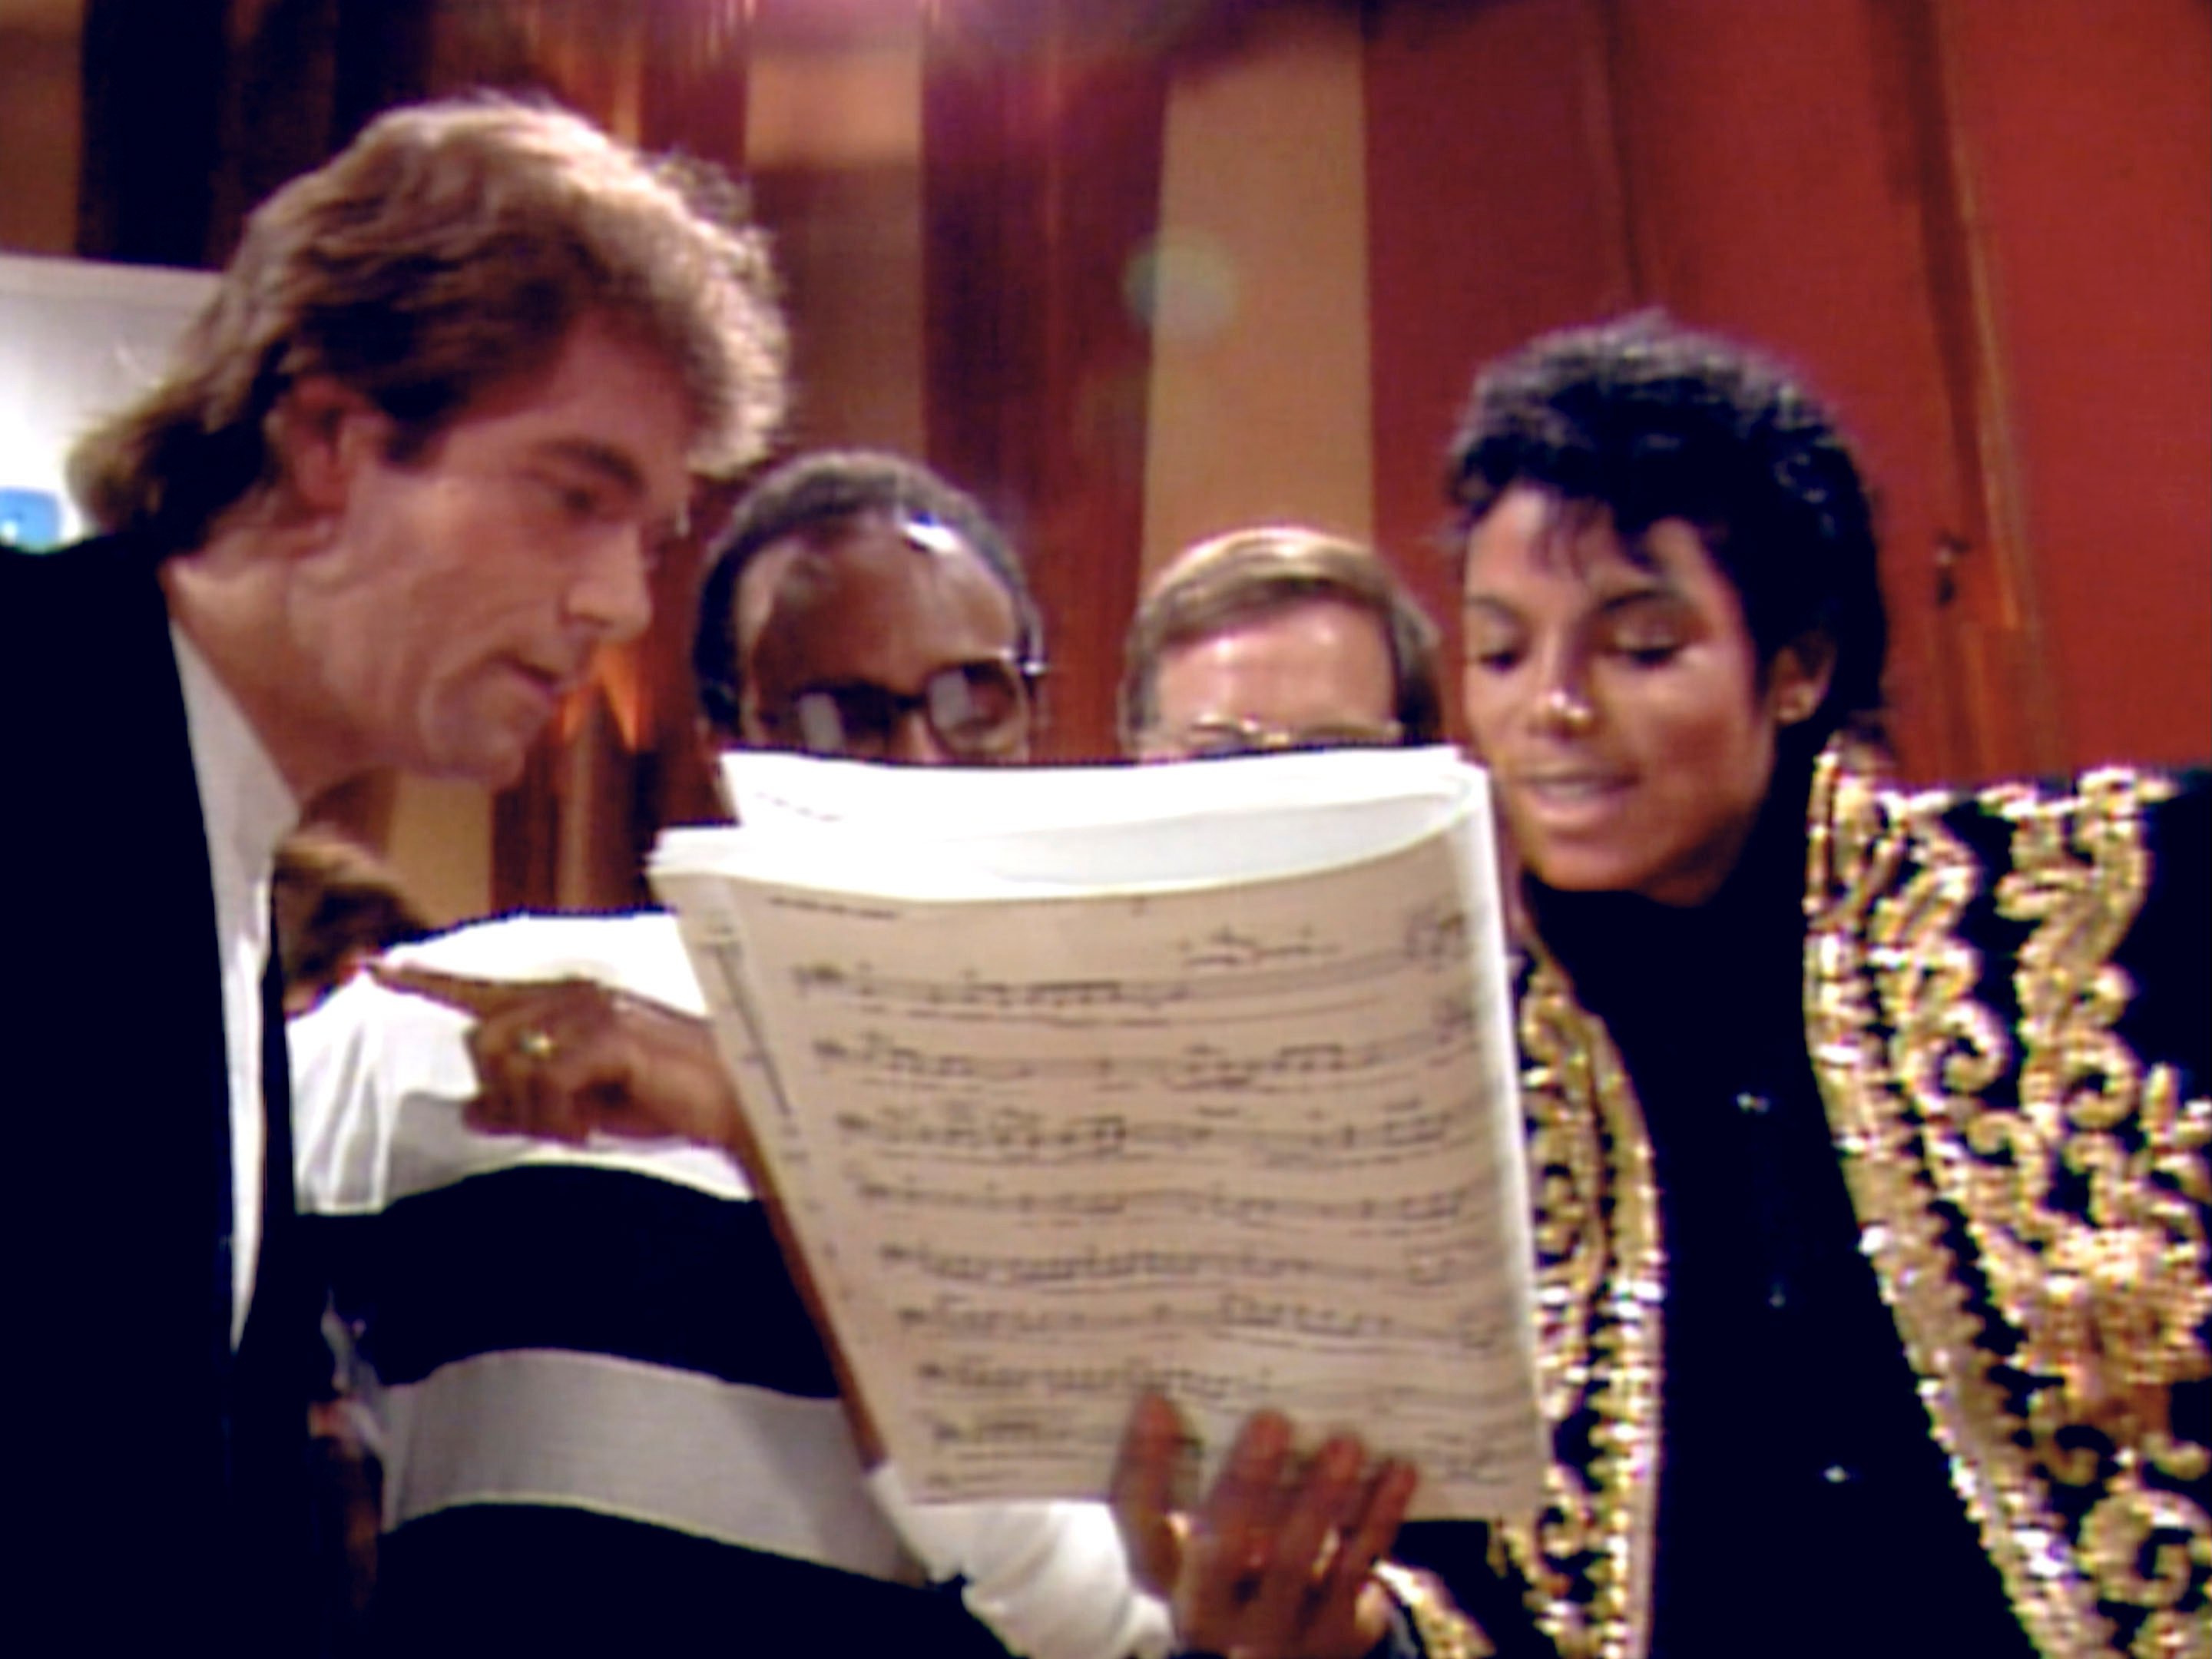 (From left) Huey Lewis, Quincy Jones and Michael Jackson in a still from Netflix’s The Greatest Night in Pop, a documentary that tells the “honest story” of how the 1985 charity megahit “We Are the World” was made. Photo: Netflix/AP